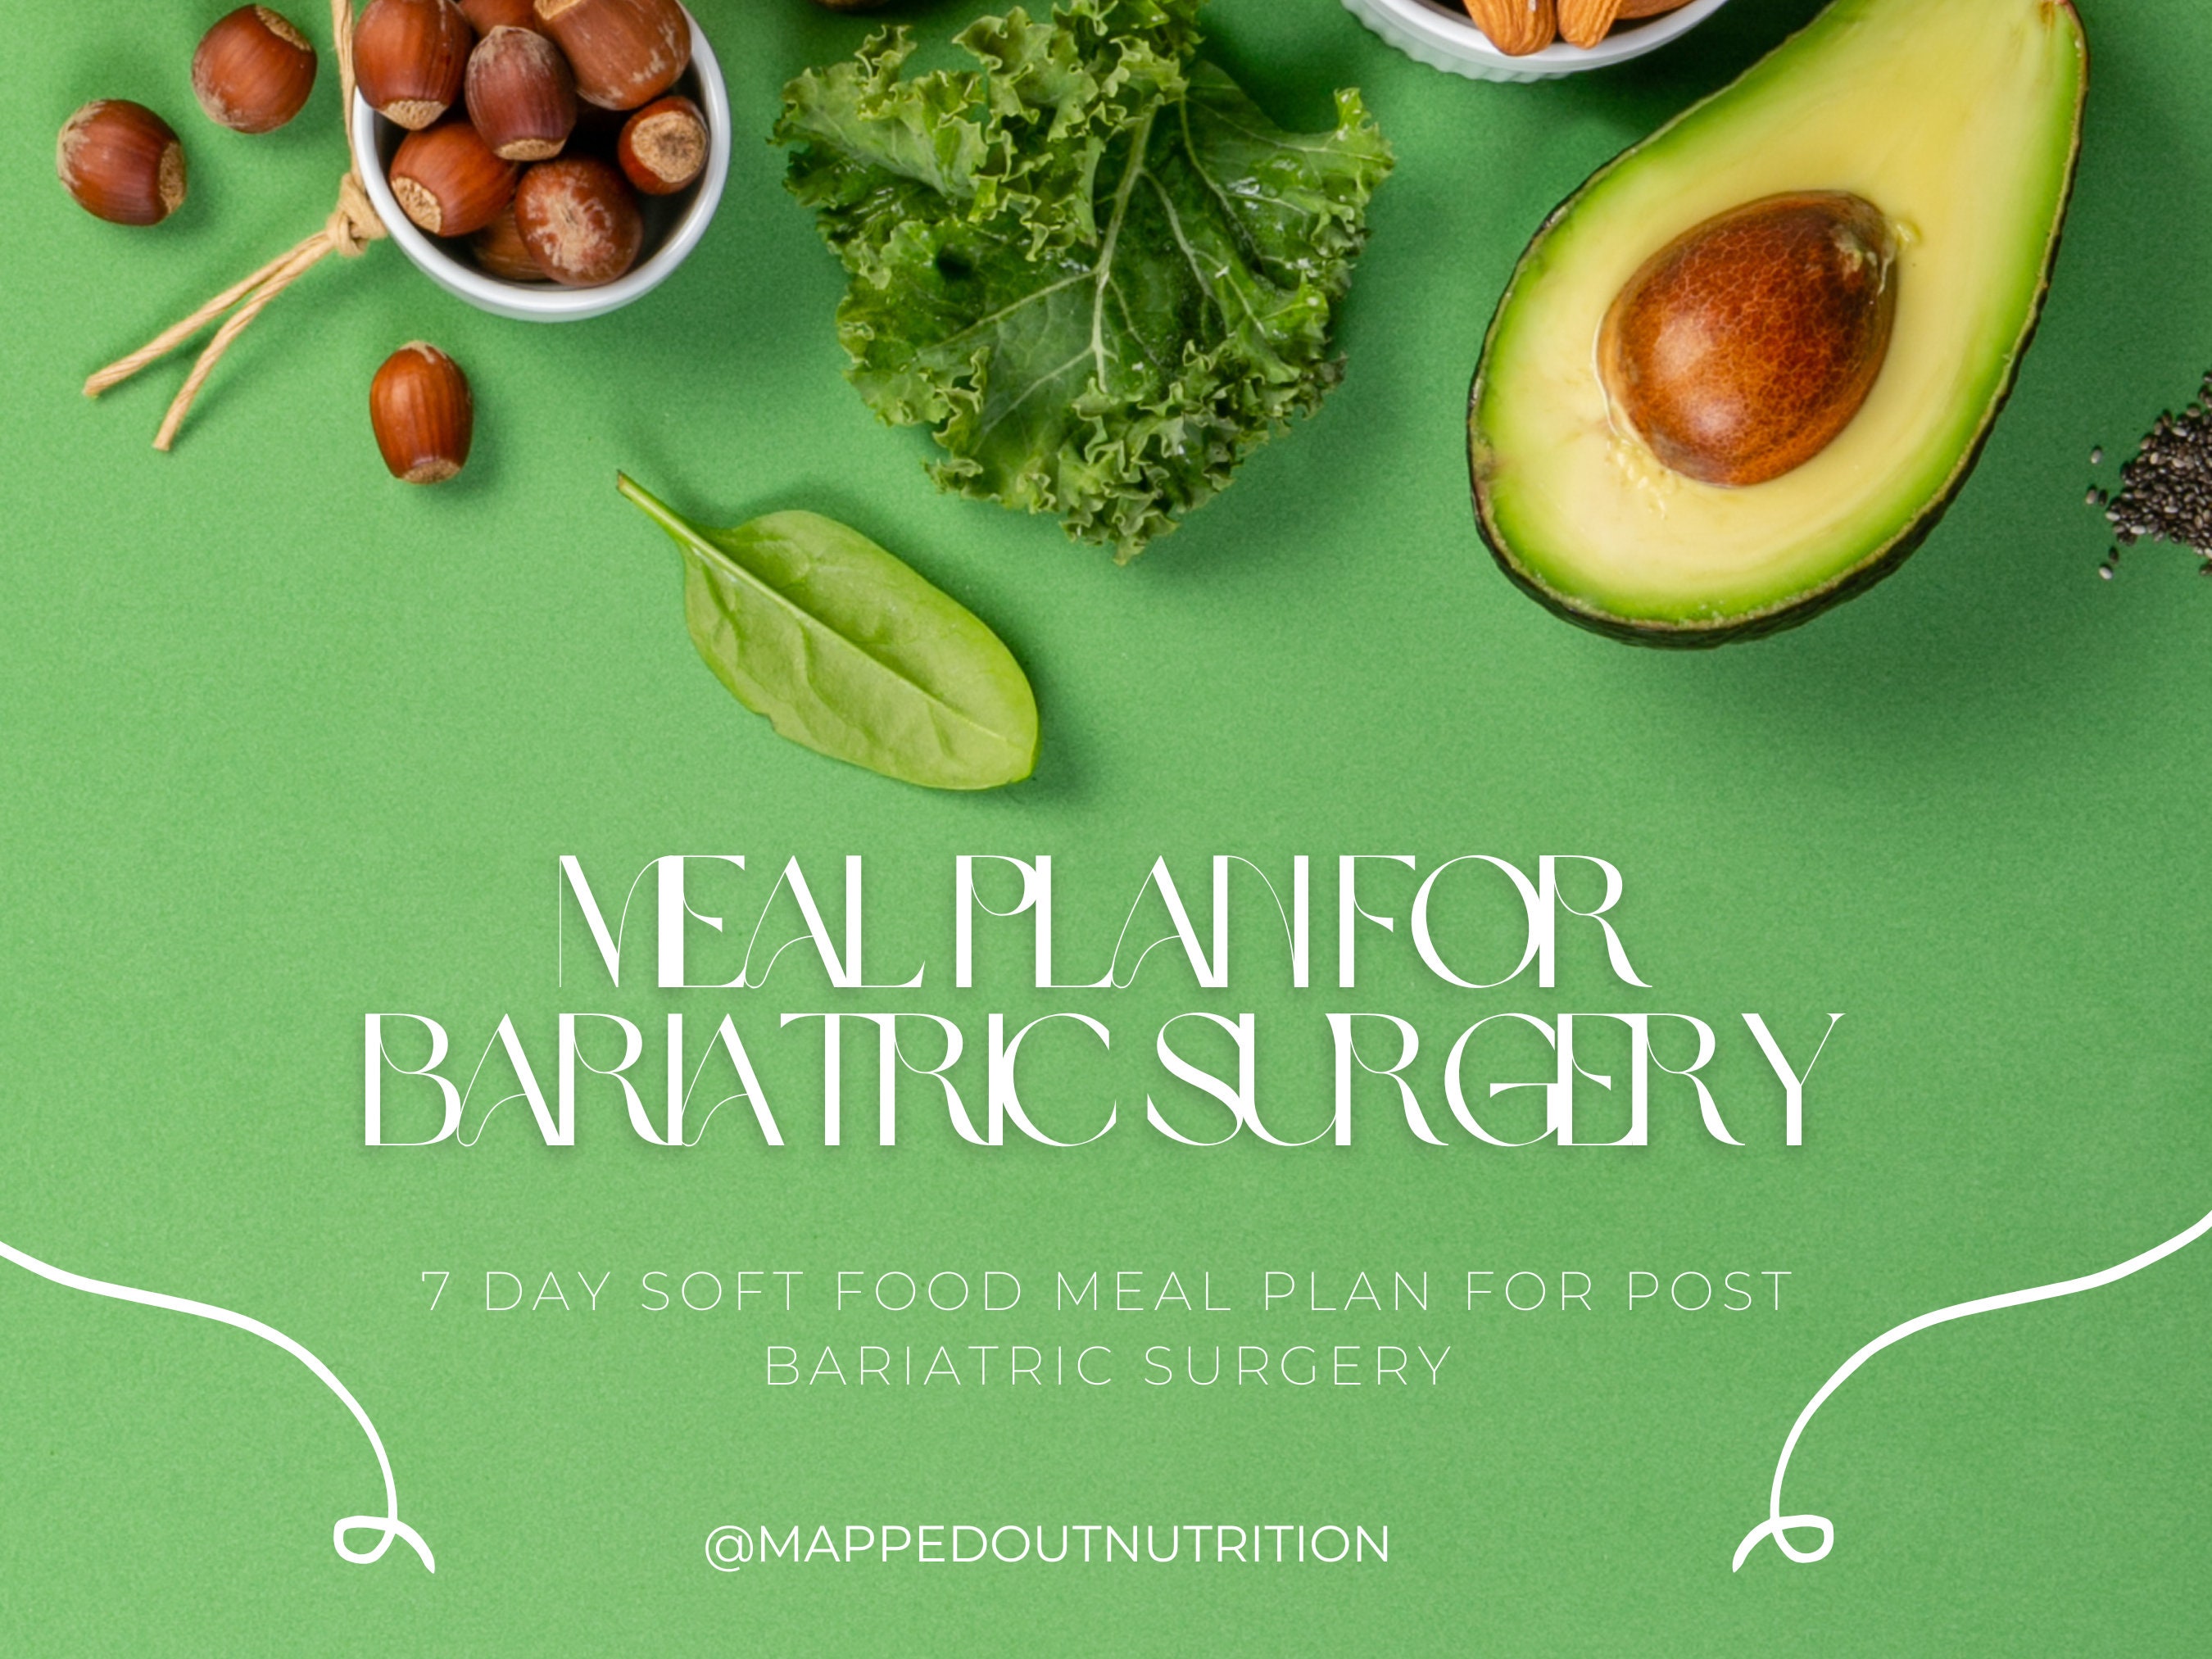 Bariatric Soft Food Recipes: Diet Plan After Bariatric Surgery